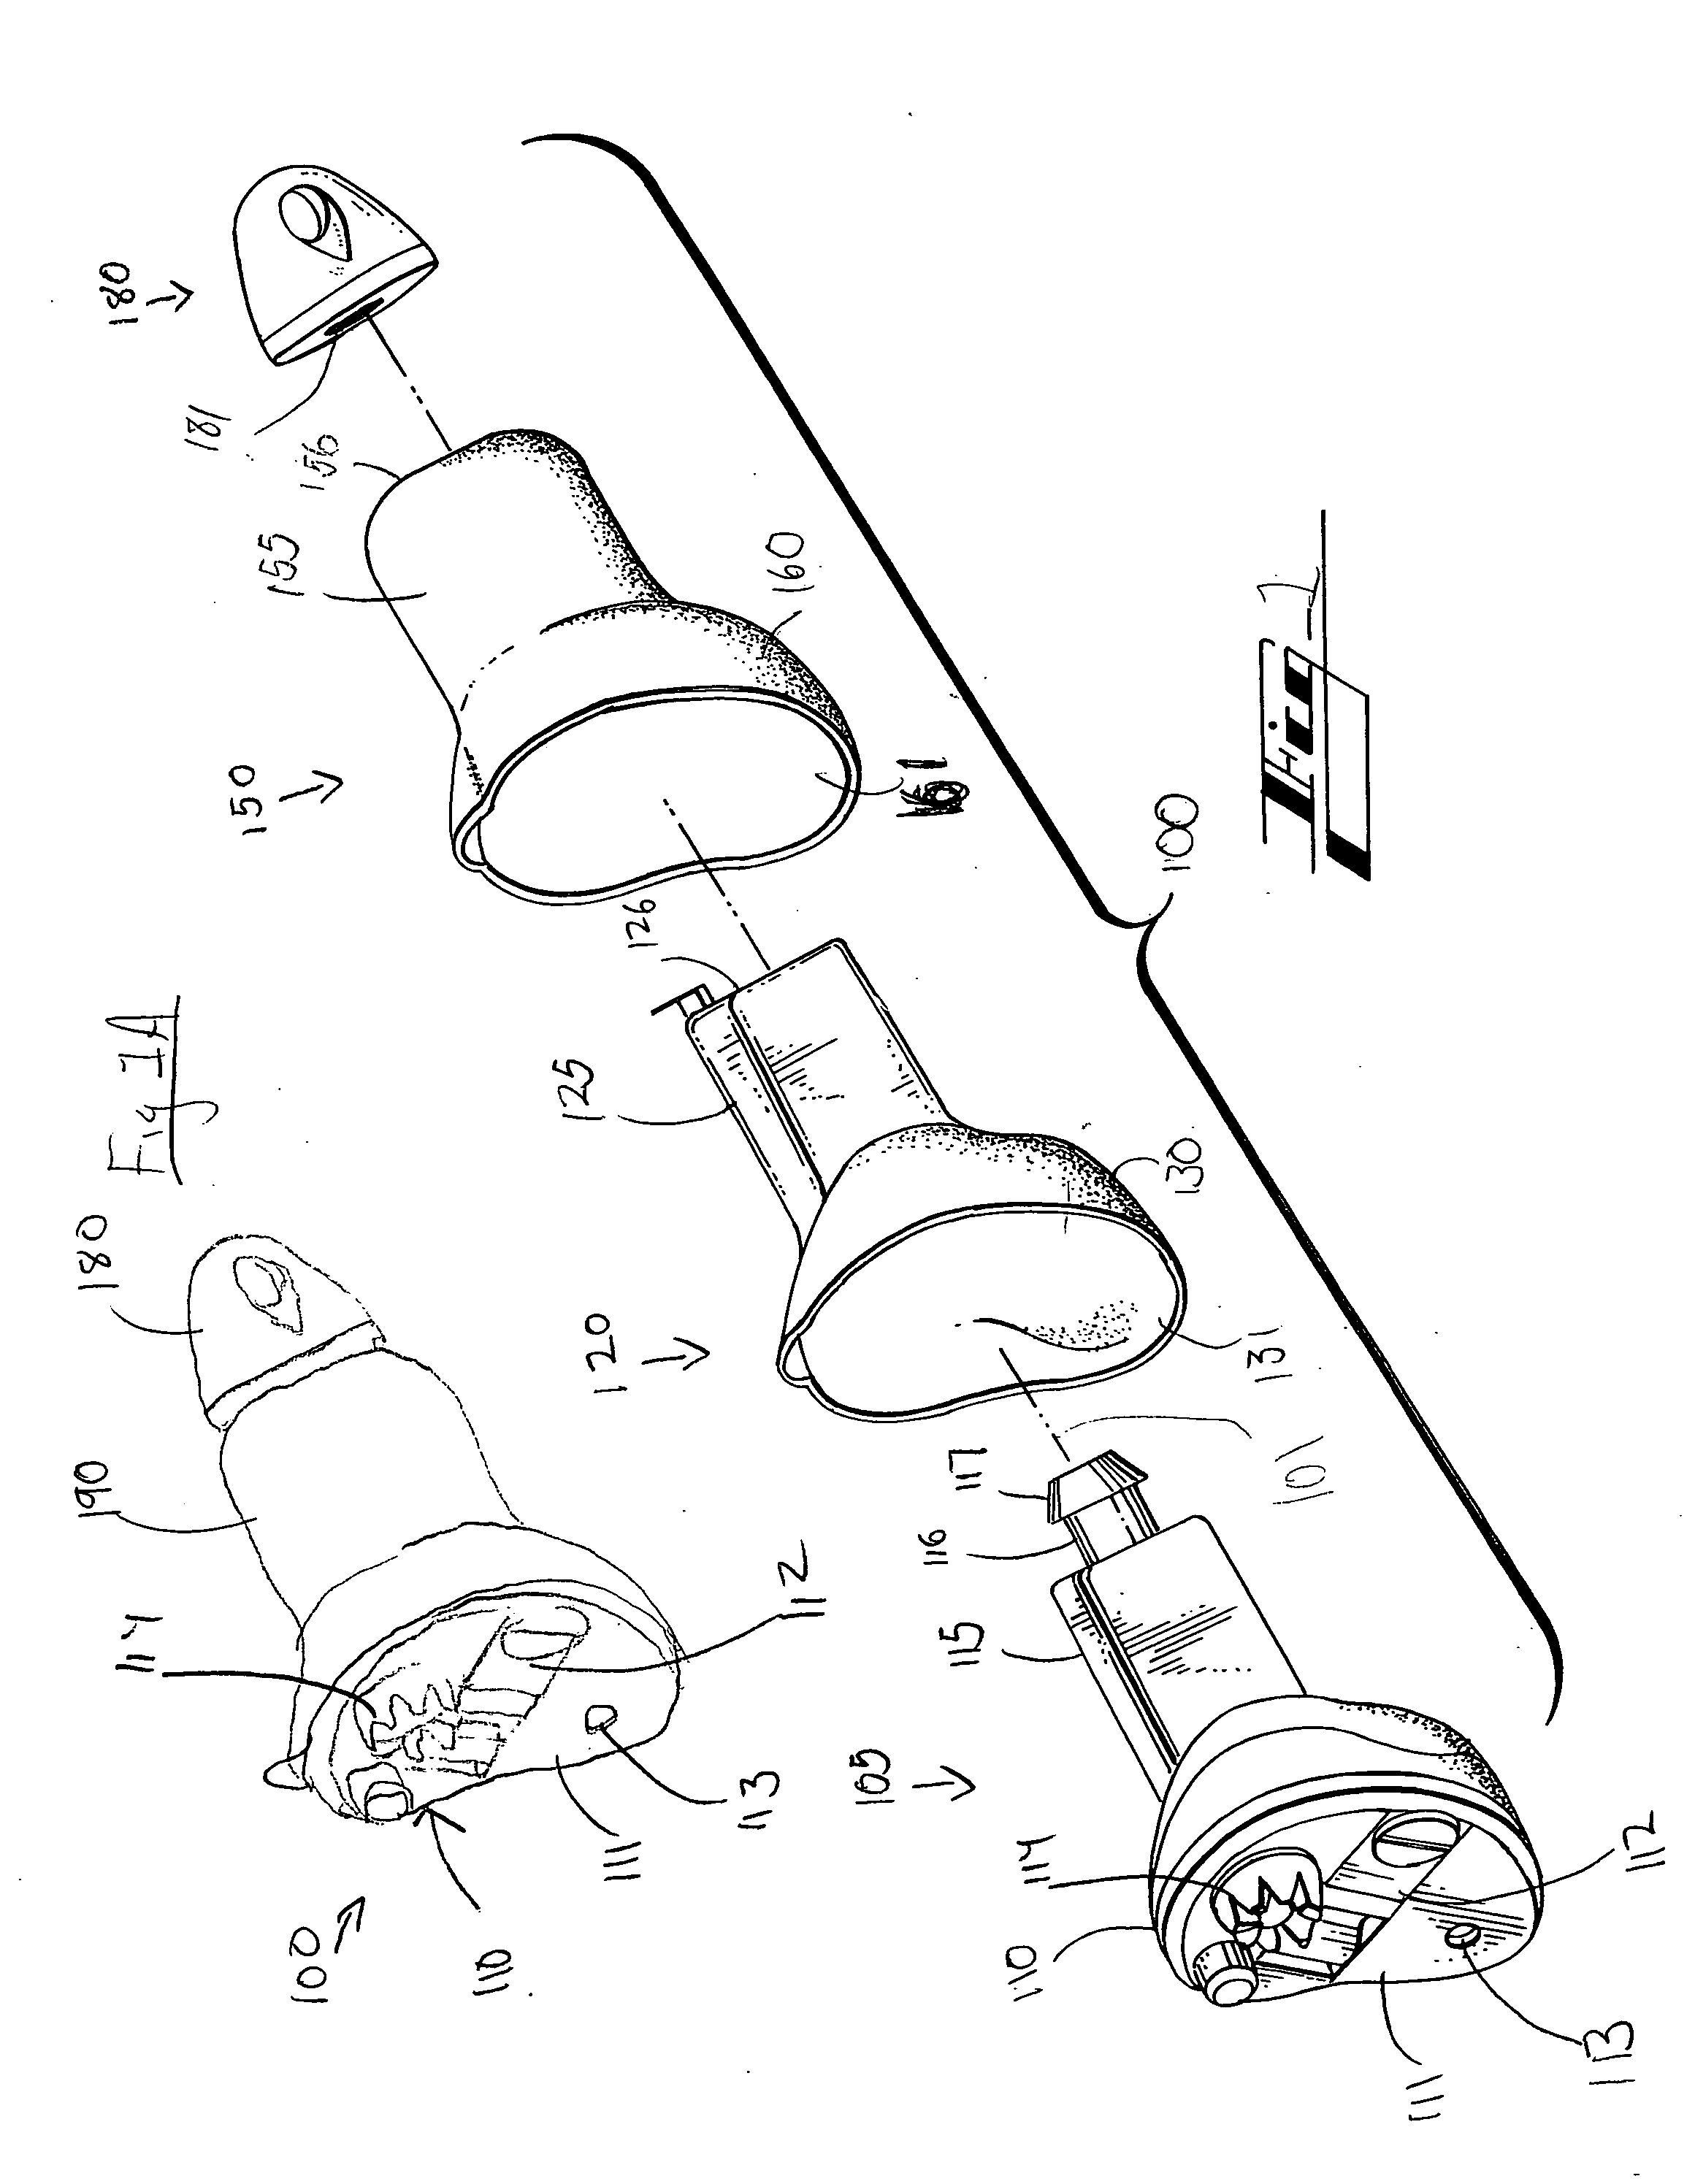 Shell in shell hearing aid system